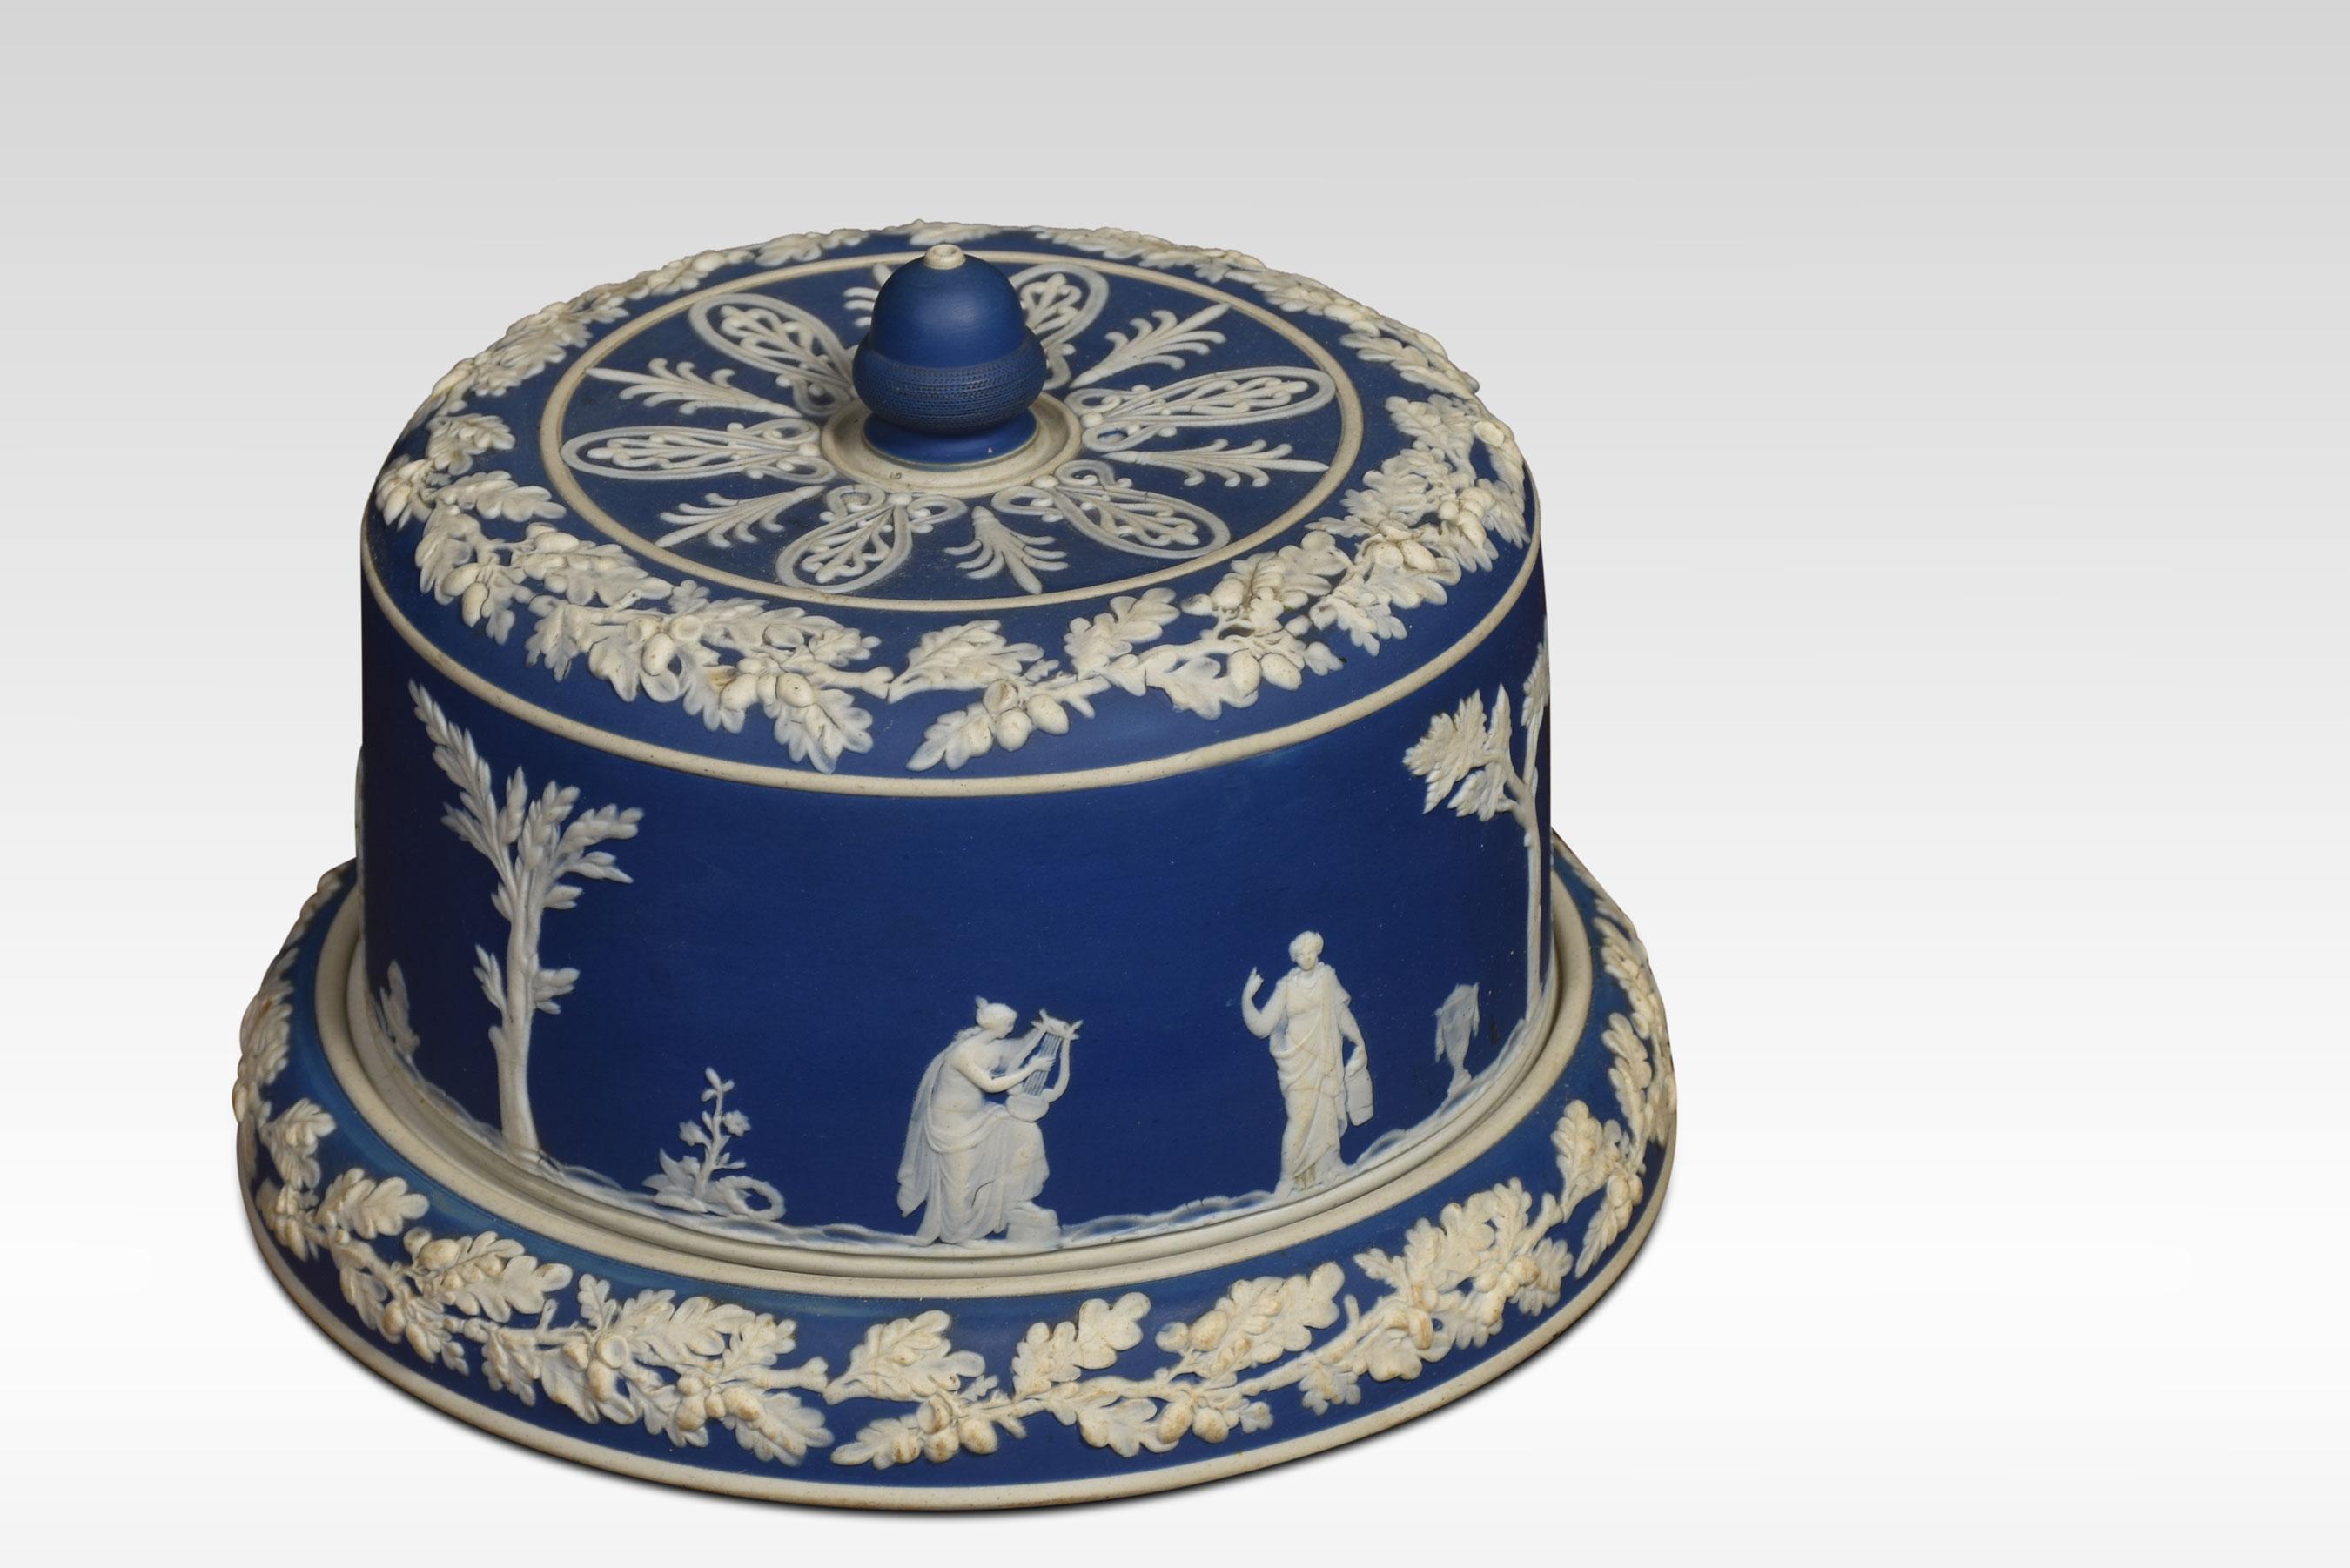 A late 19th-century blue dip Jasperware cylindrical form cheese dish and cover, with acorn finial, decorated in relief with winged figures within bands of oak leaves.
Dimensions
Height 8 inches
Width 10.5 inches
Depth 10.5 inches.